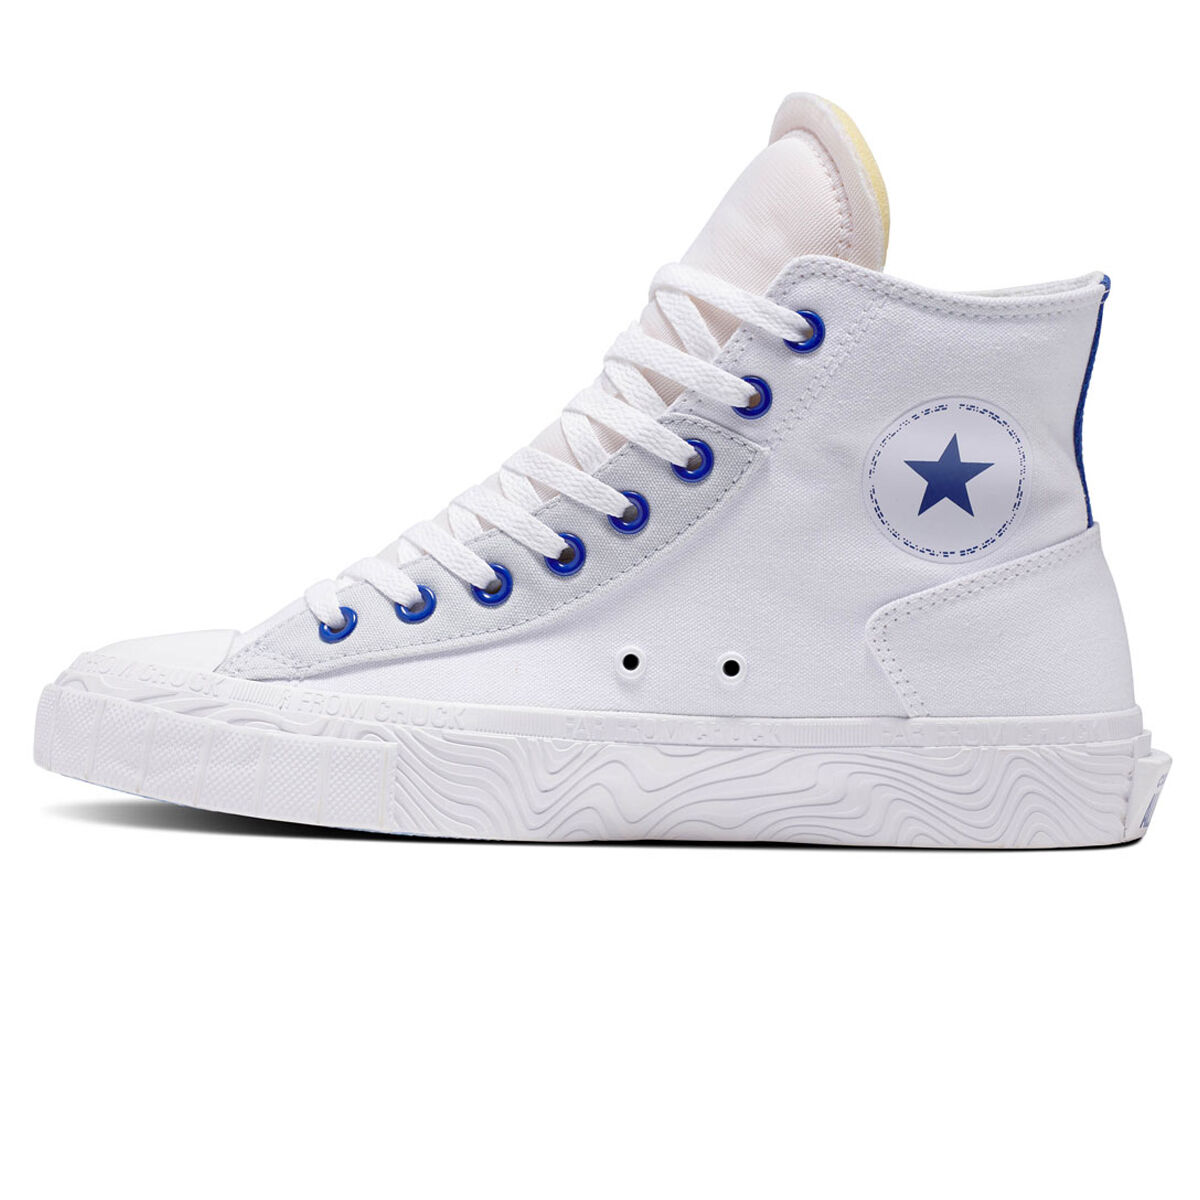 Snazzy Pludselig nedstigning Afsnit Converse Chuck Taylor All Star Retro Sport Mens Casual Shoes | Rebel Sport